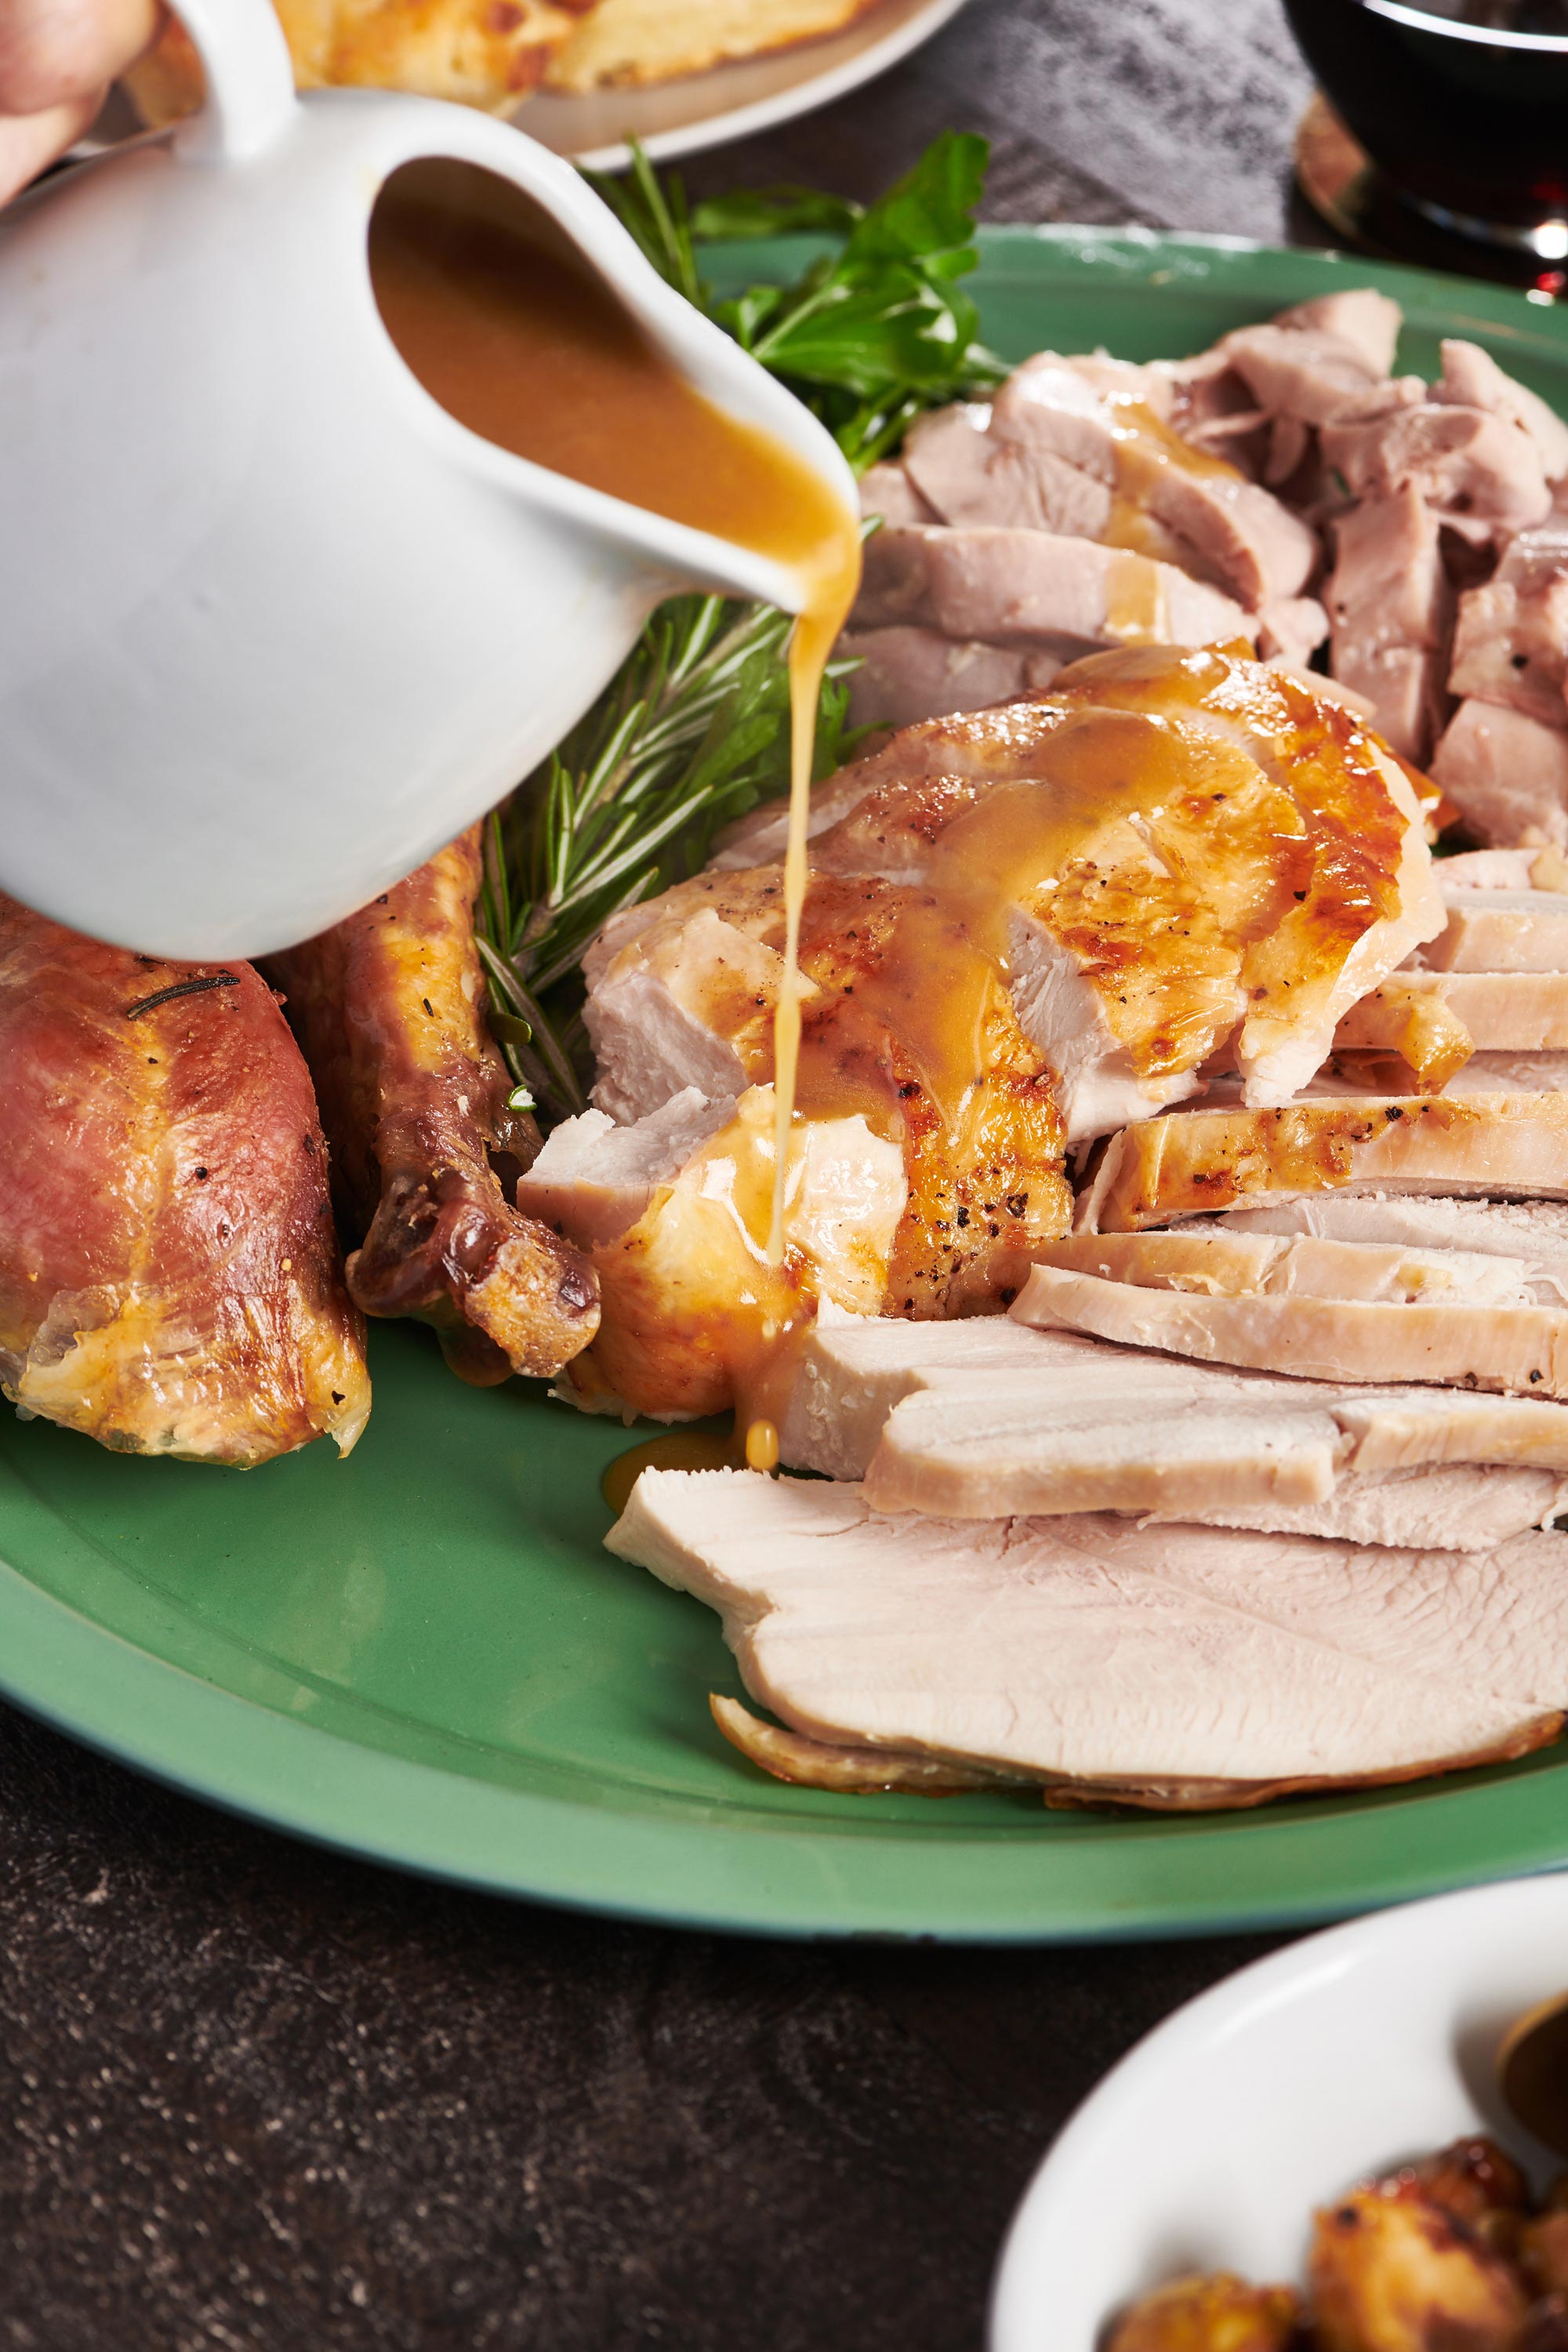 Gravy being poured over sliced turkey on a green plate. 